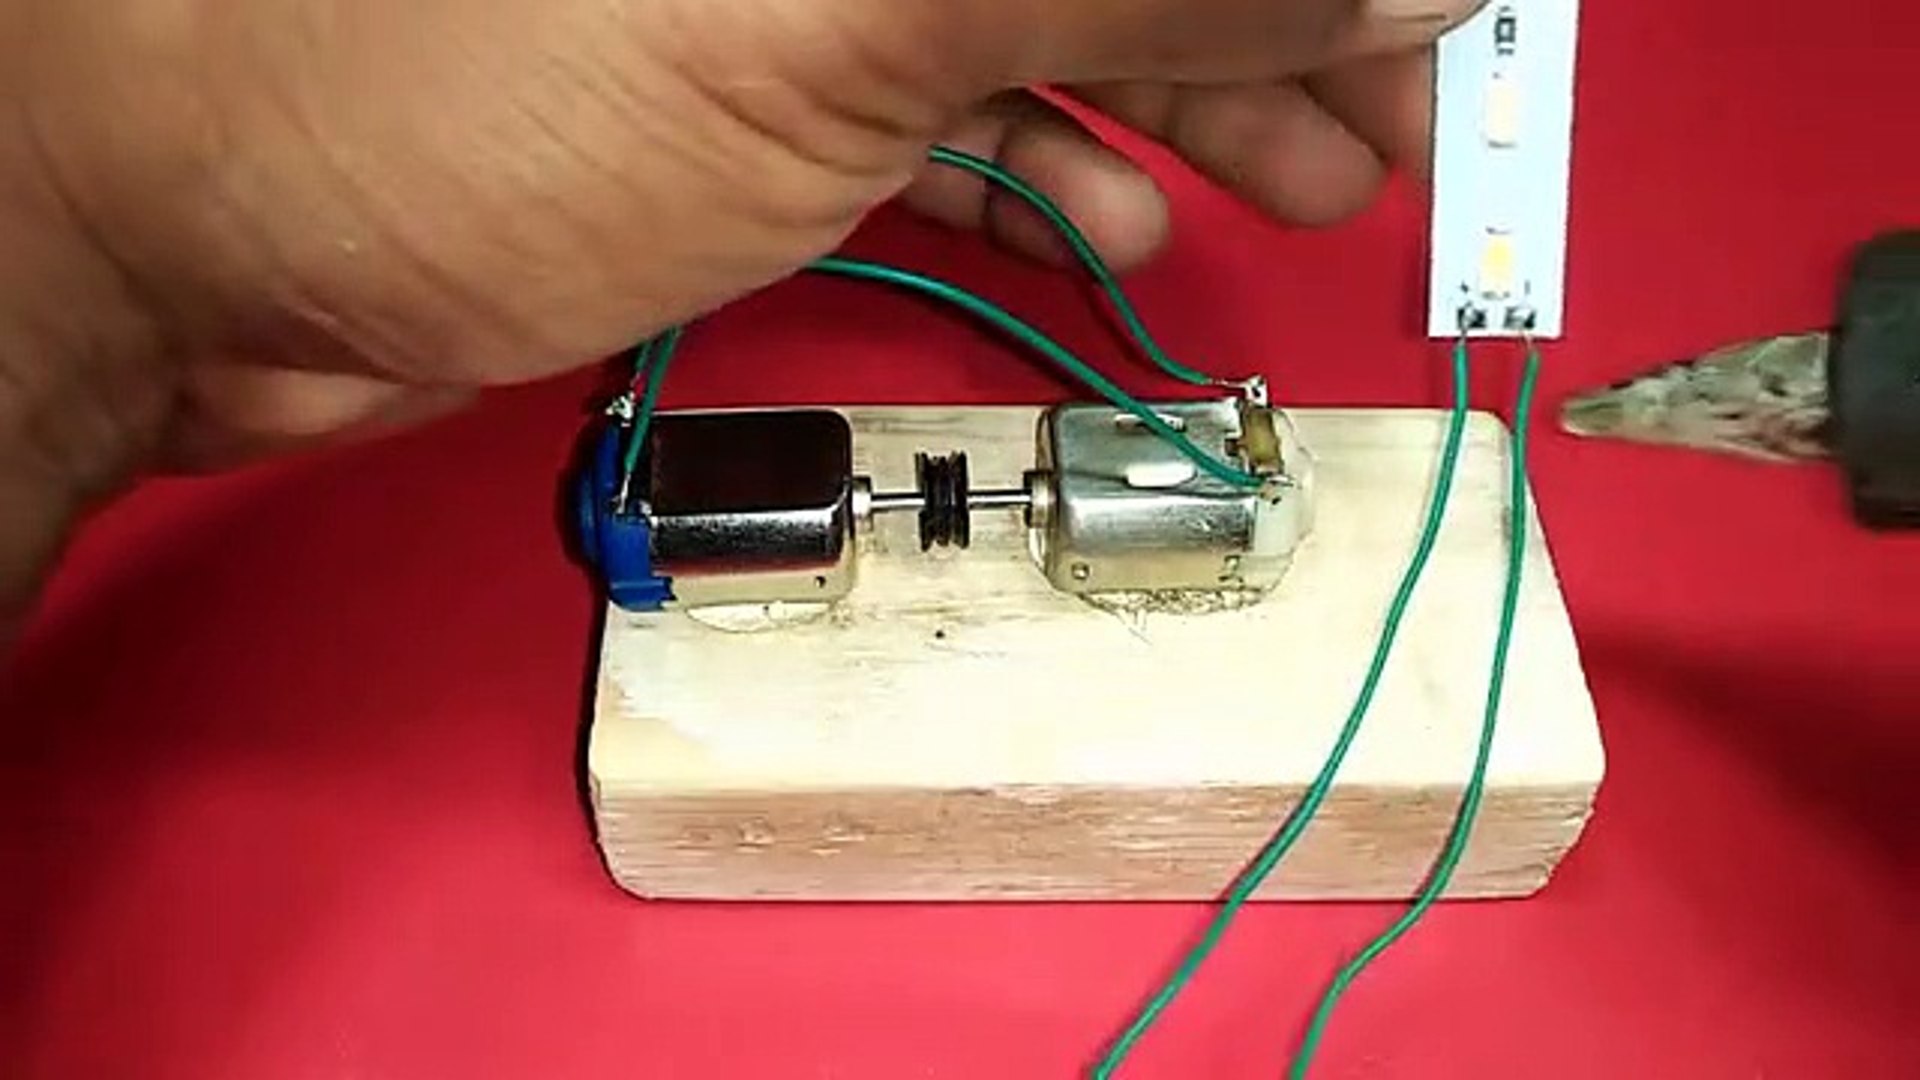 How to Make Free Energy generator Light Bulb by 12v Motor Homemade new  inventions - video Dailymotion